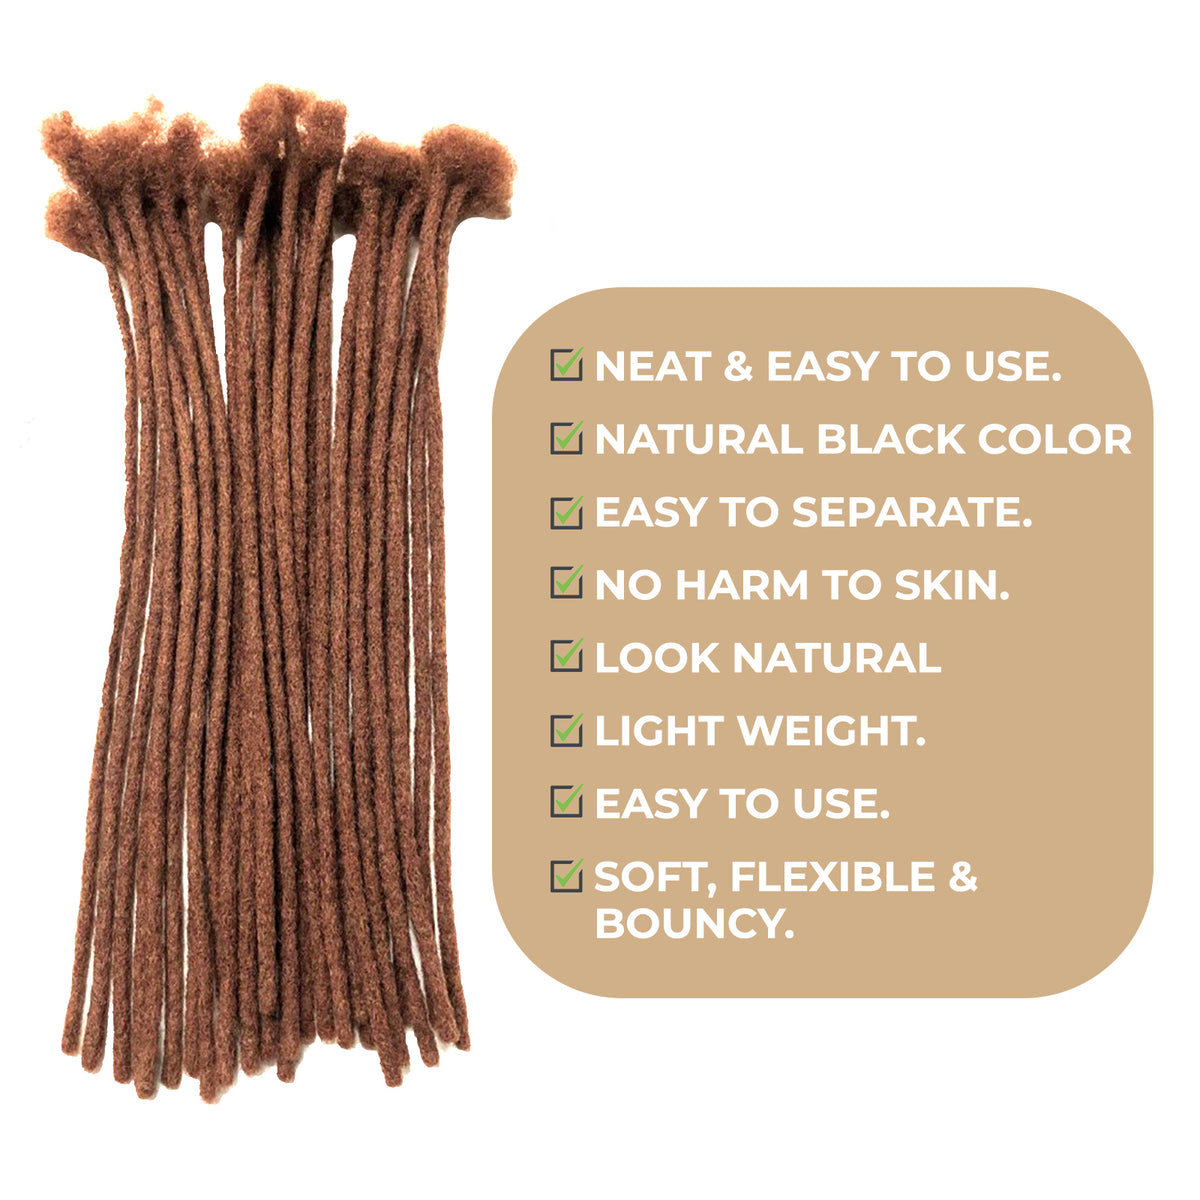 100% Human Hair Dreadlock Extensions 16Inch 10 Strands Handmade Natural Loc Extensions Human Hair Bundle Dreads Extensions For Woman & Men Can Be Dyed/Bleached (Brown/33, 16inch length 0.2 cm Width)